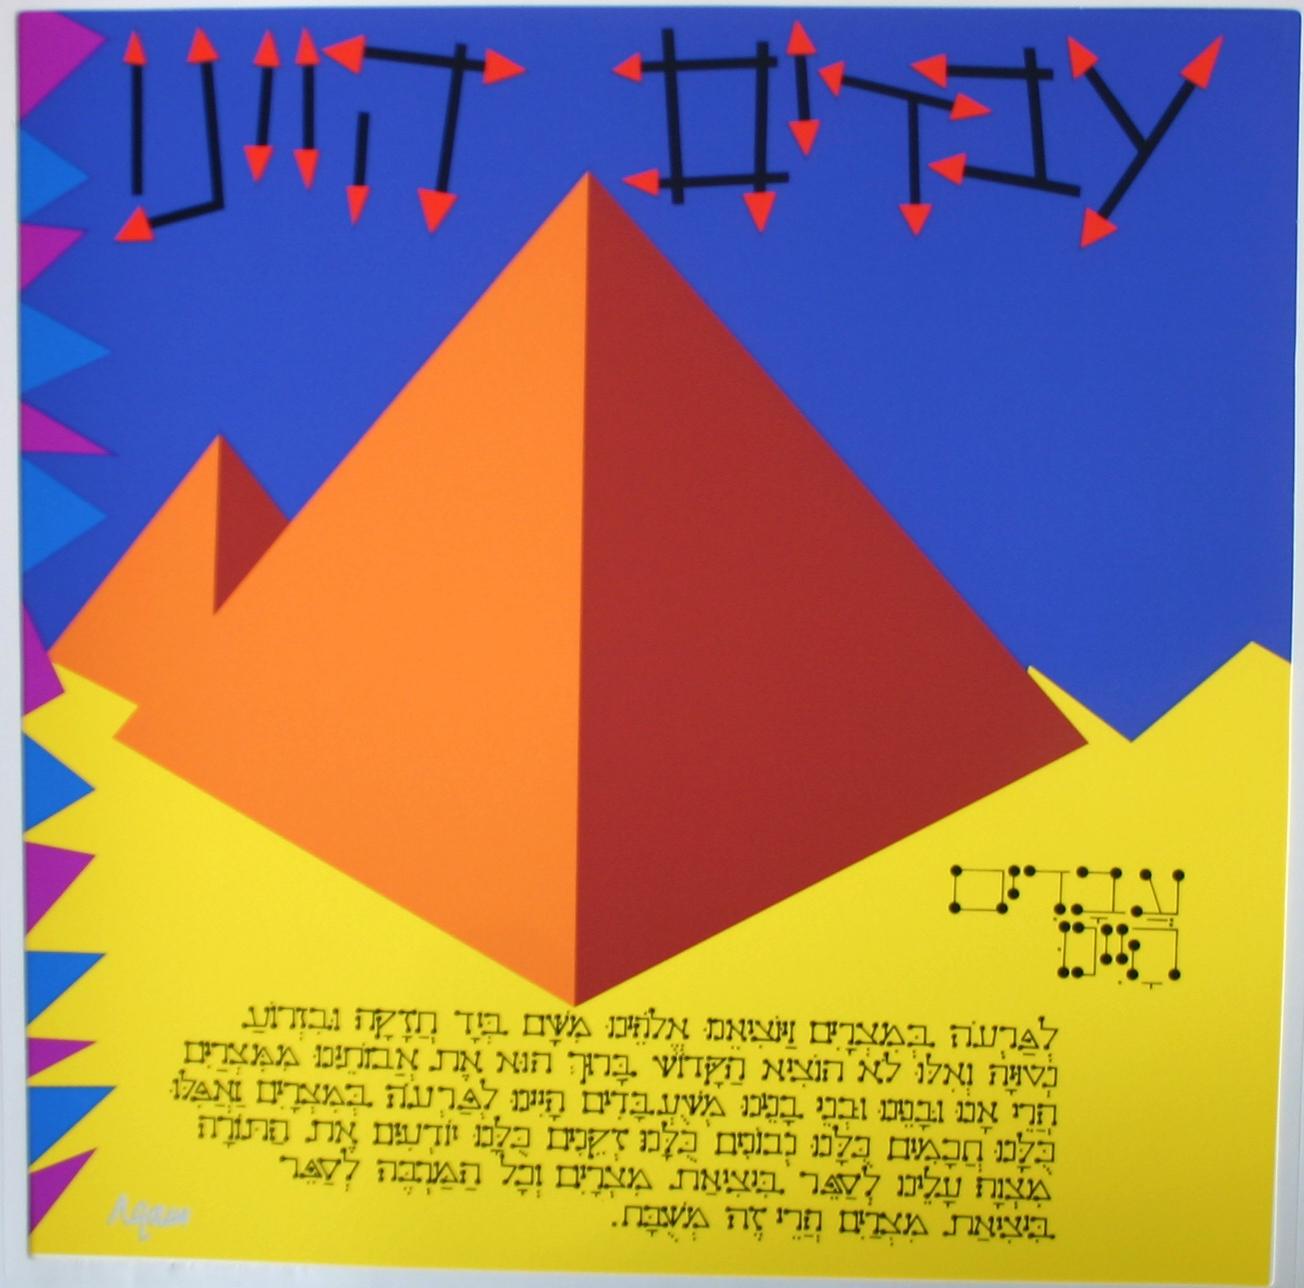 A Passover Haggadah, made by the artist Yaacov Agam.
58 original serigraphs, pulled by hand on Rivs 270 Gr. (Arjomarie-Prioux) by Atelier Arcay in Paris, 1985.
All color separations were produced by the artist, all screens used for each image were